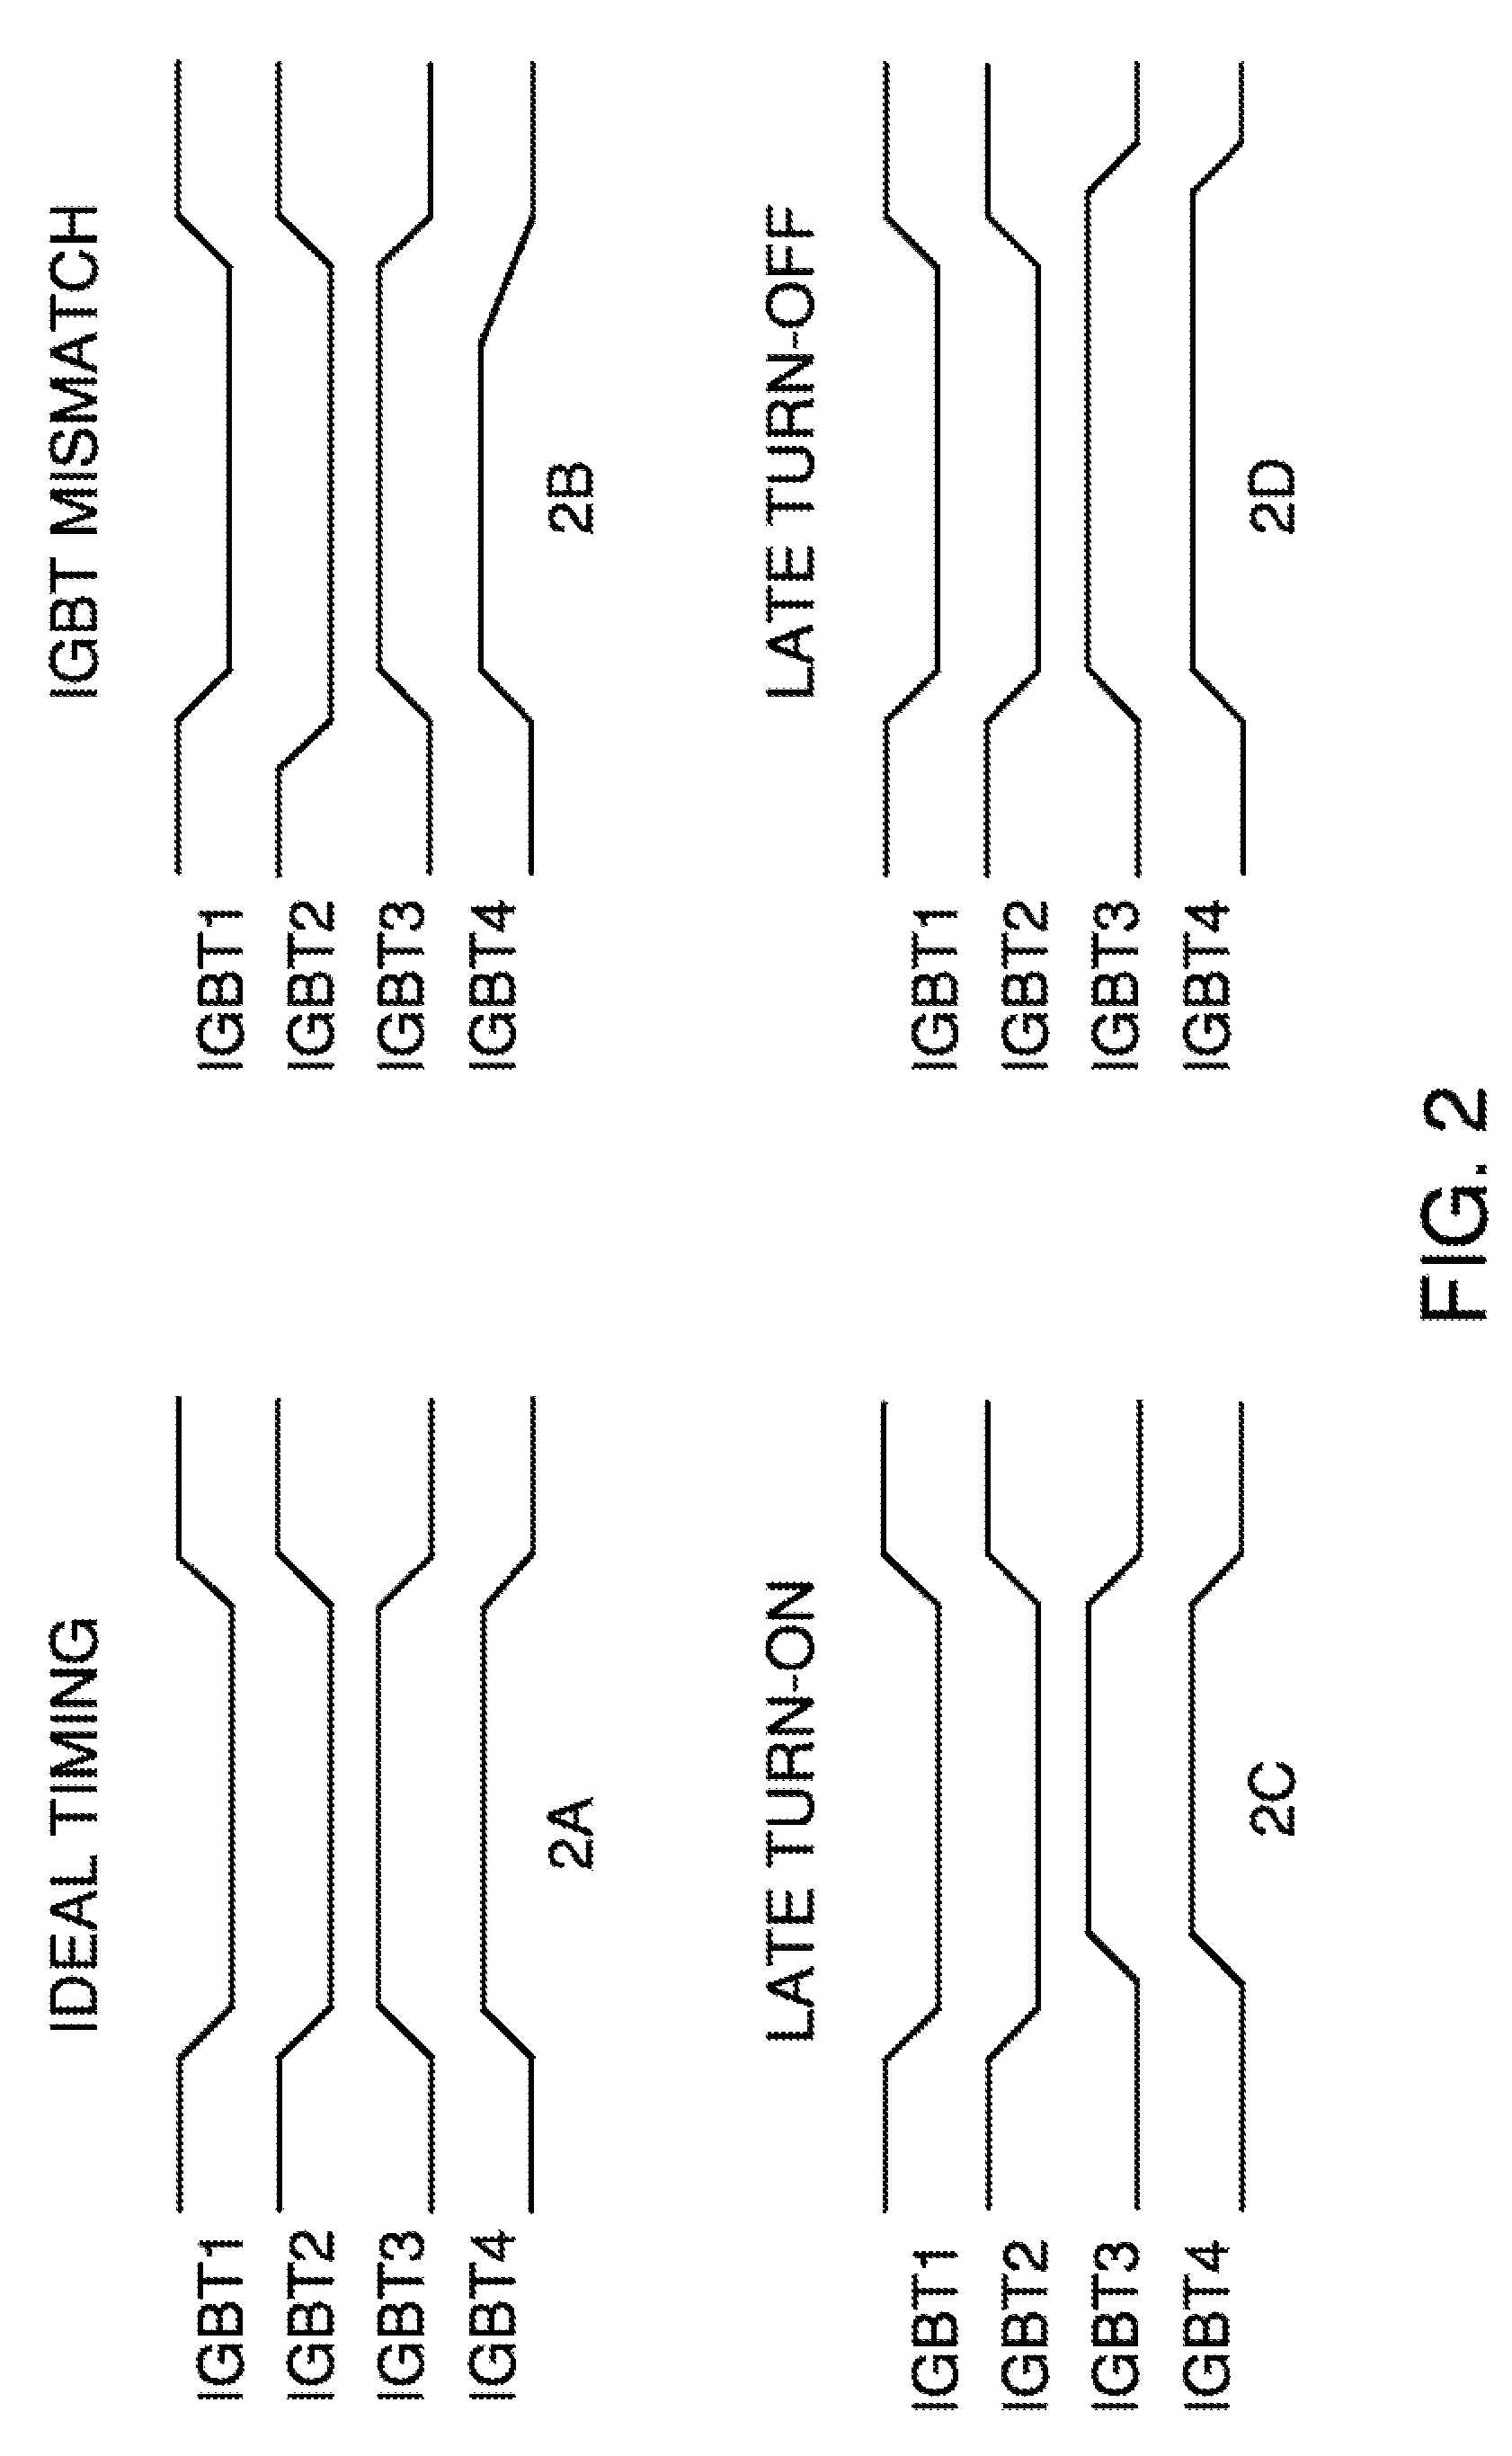 Sine wave lamp controller with active switch commutation and anti-flicker correction